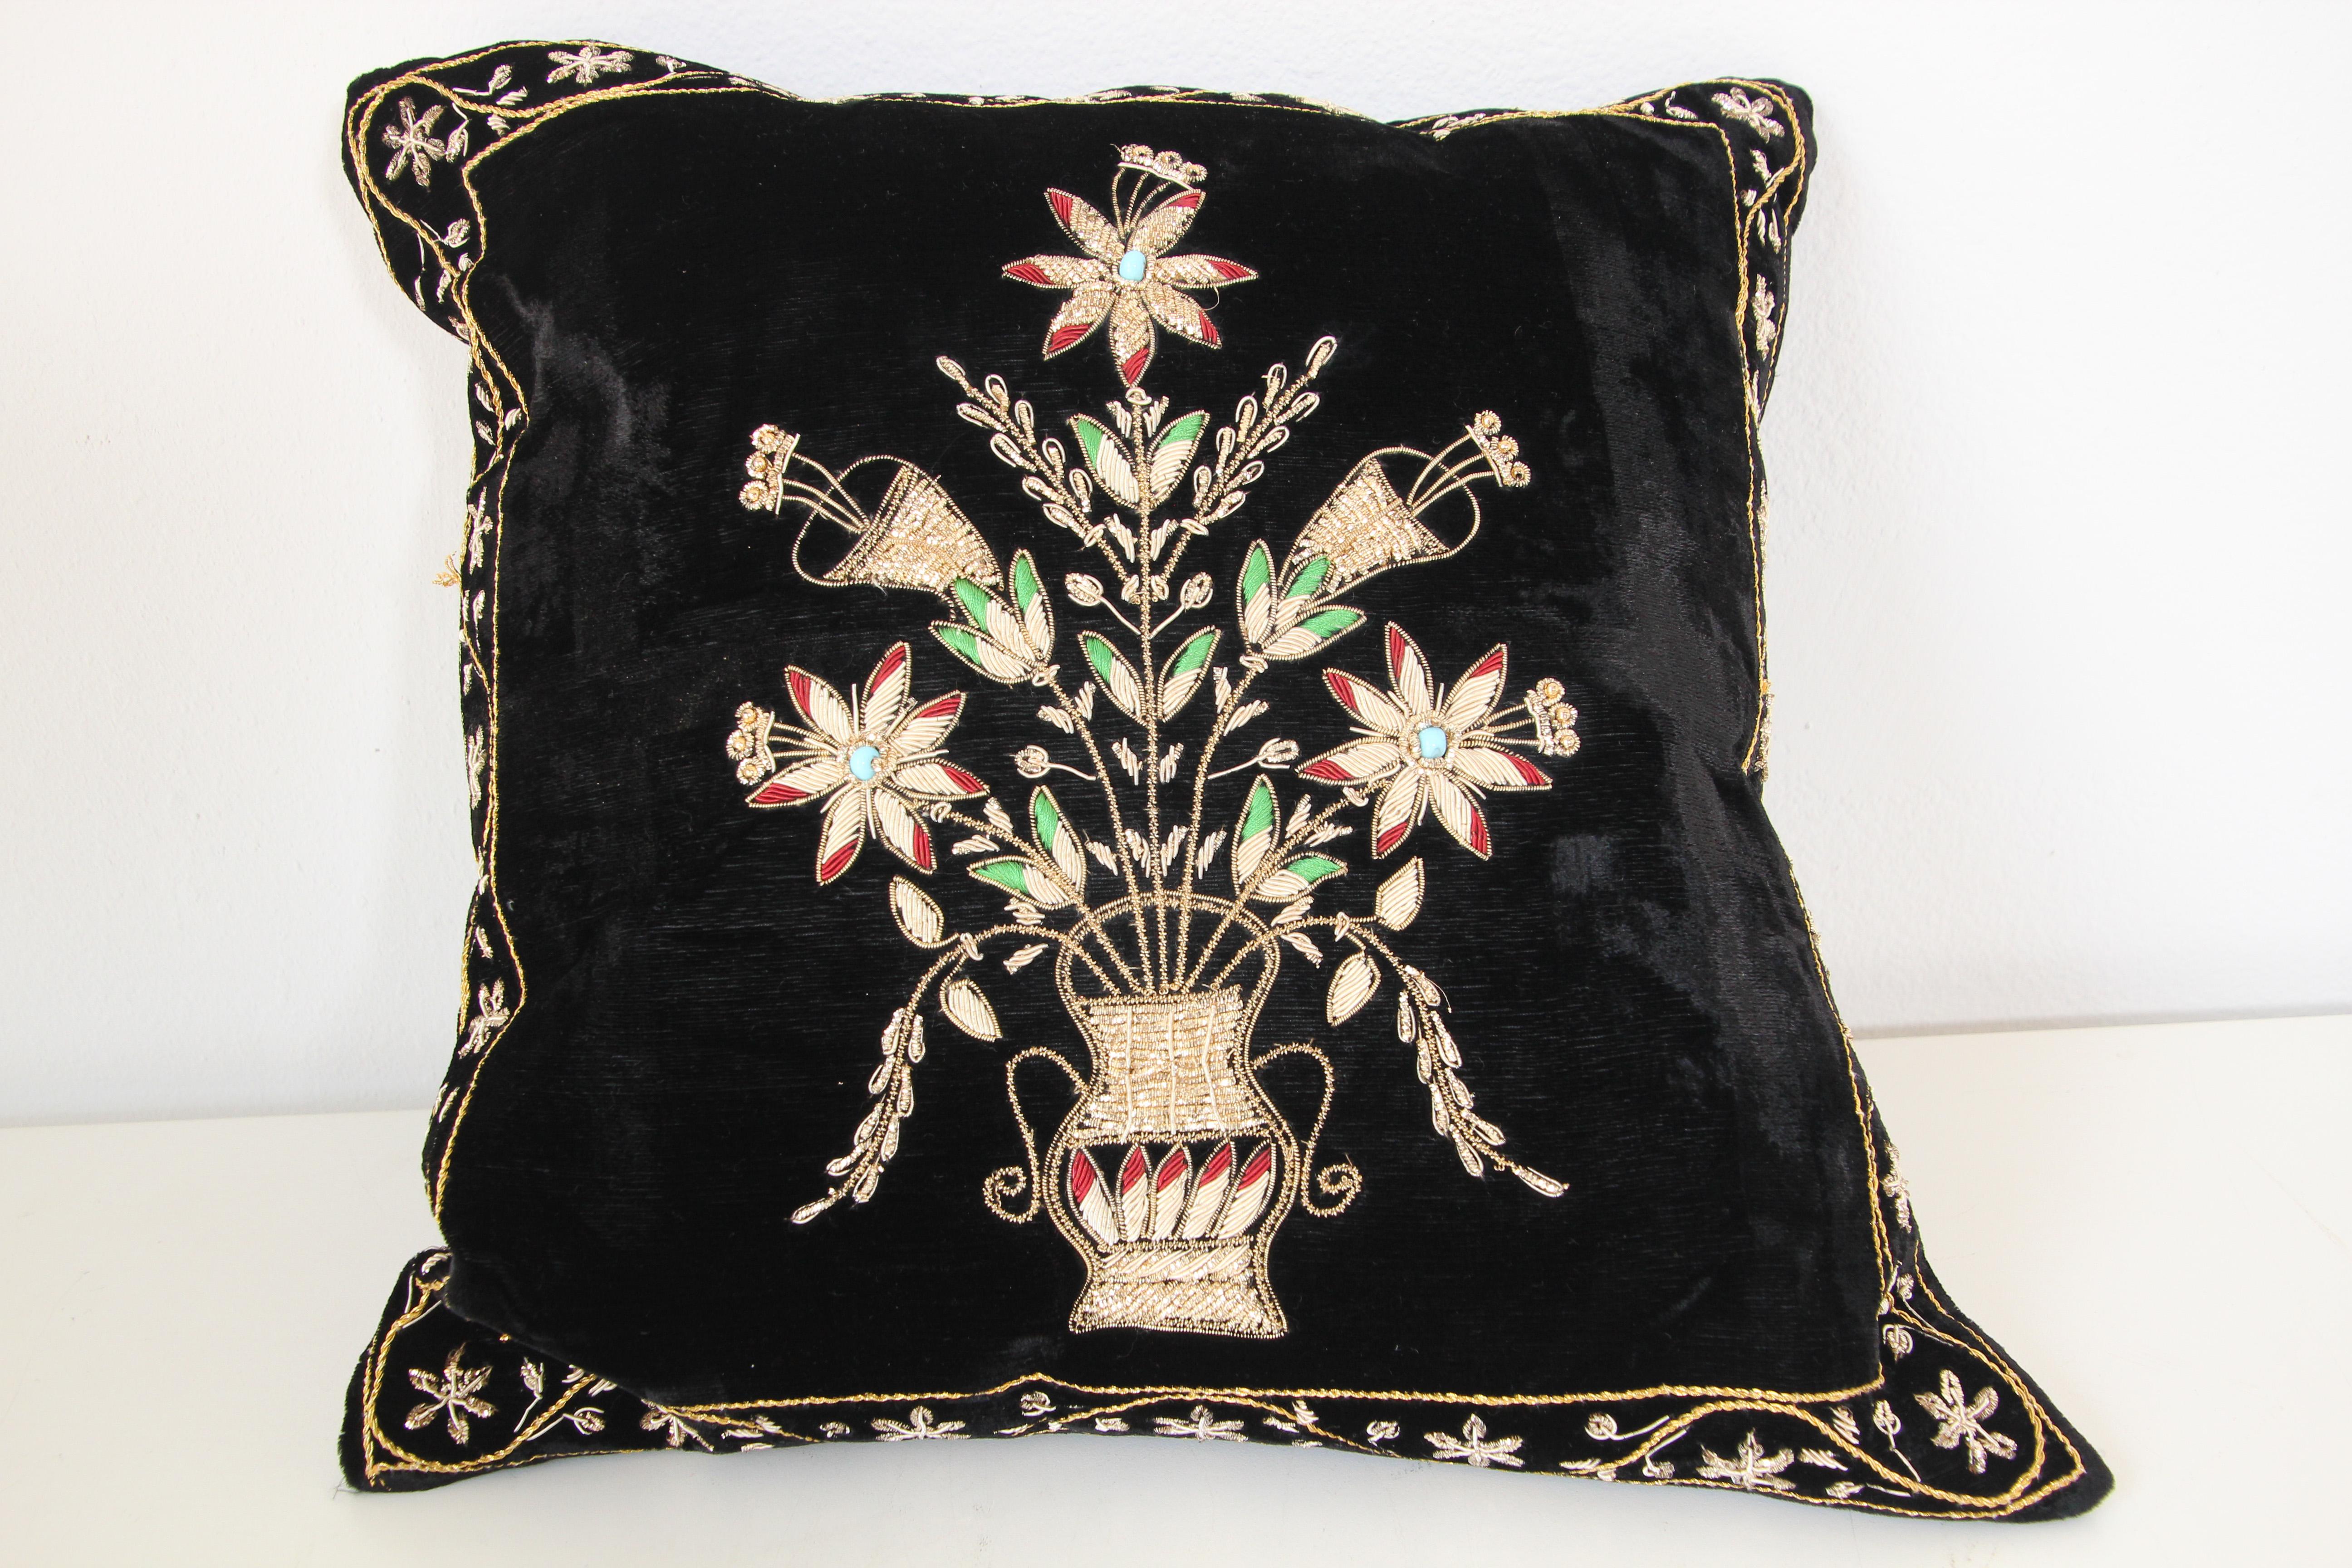 Velvet black silk pillow hand embroidered with gold threads and sequins depicting a vase with flowers.
Gold, emerald green, turquoise blue and ruby red with turquoise pearl hand embroidered in velvet.
Handcrafted luxury throw pillow.
Silk backed